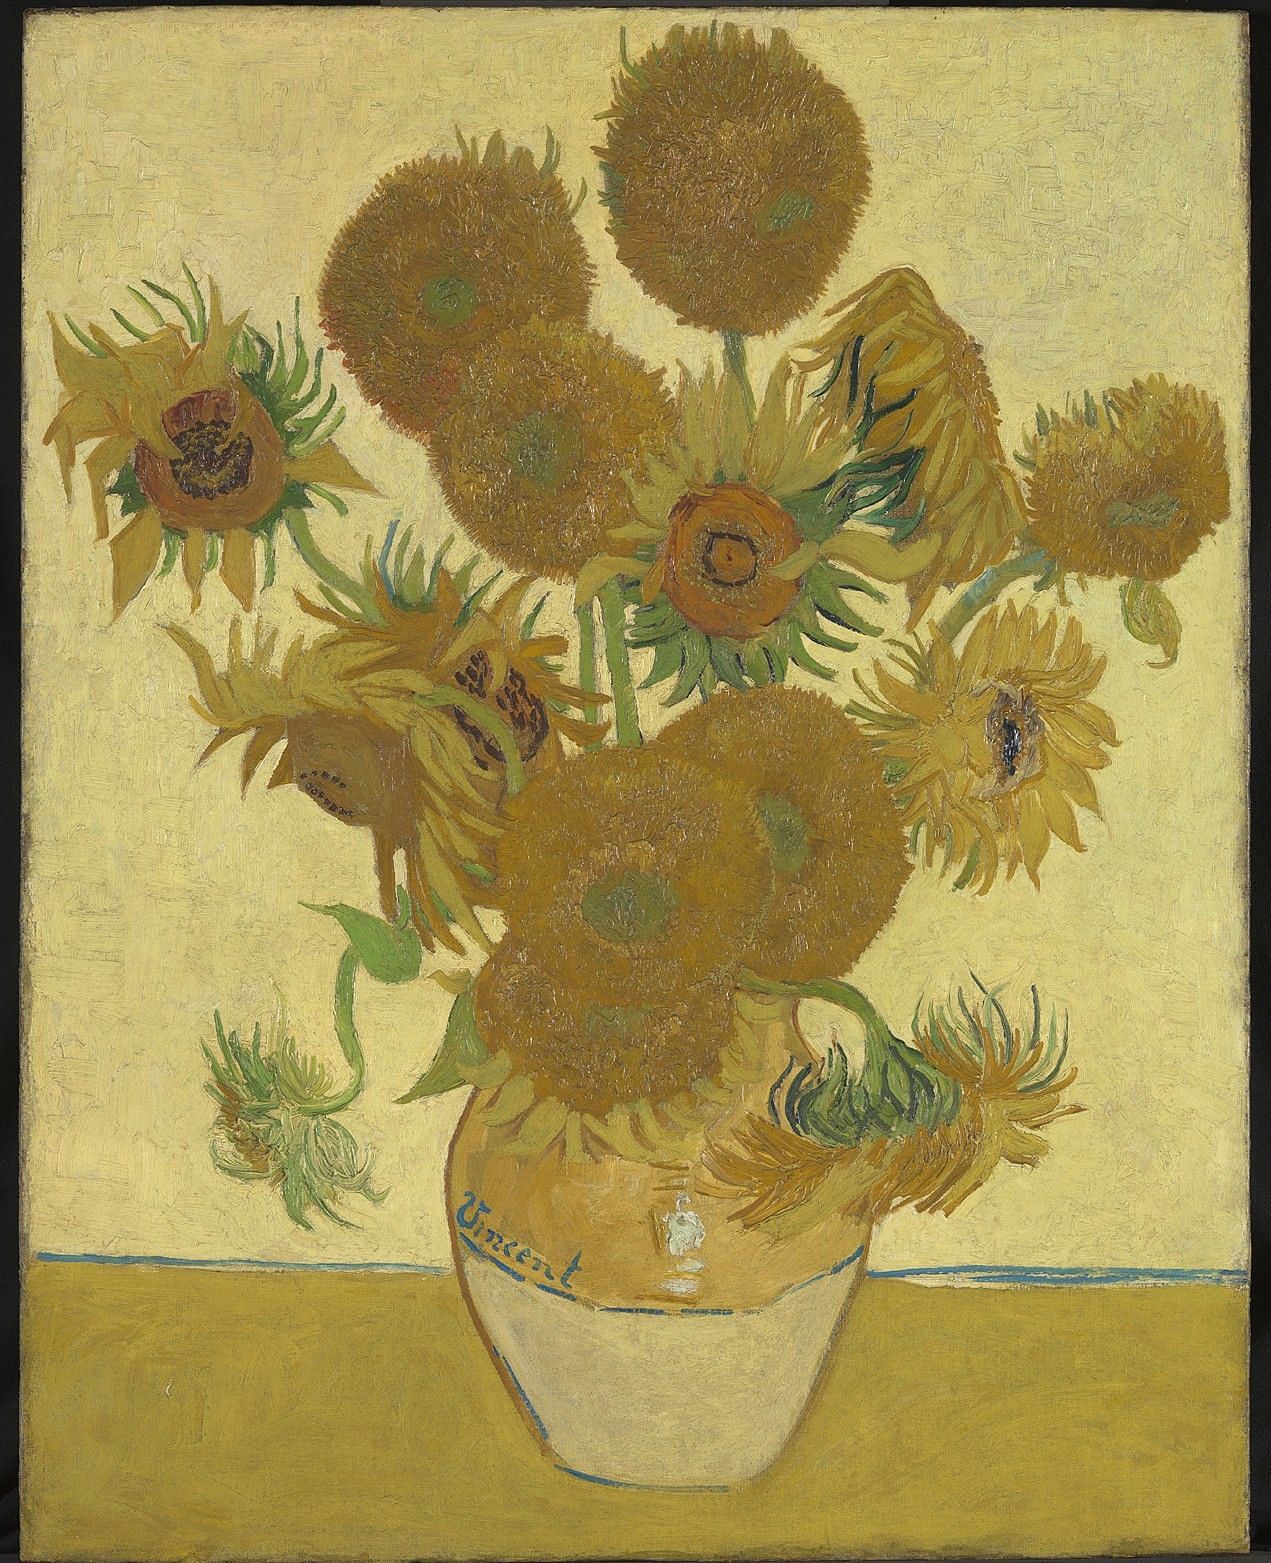 Sunflowers by Vincent Van Gogh (image via London National Gallery)